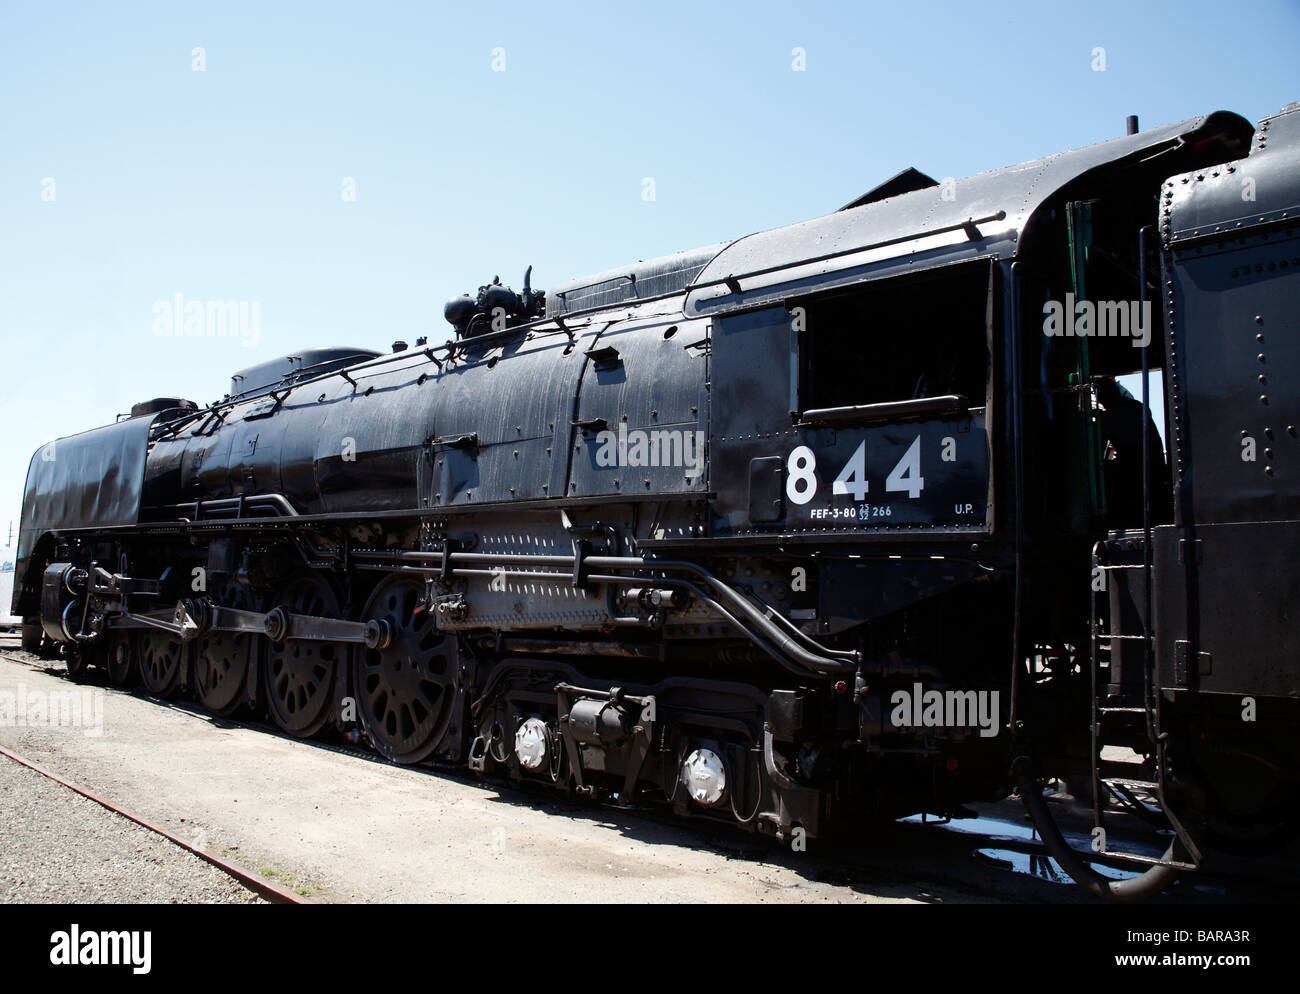 Union Pacific Steam Locomotive 844 on display in Roseville California USA Stock Photo